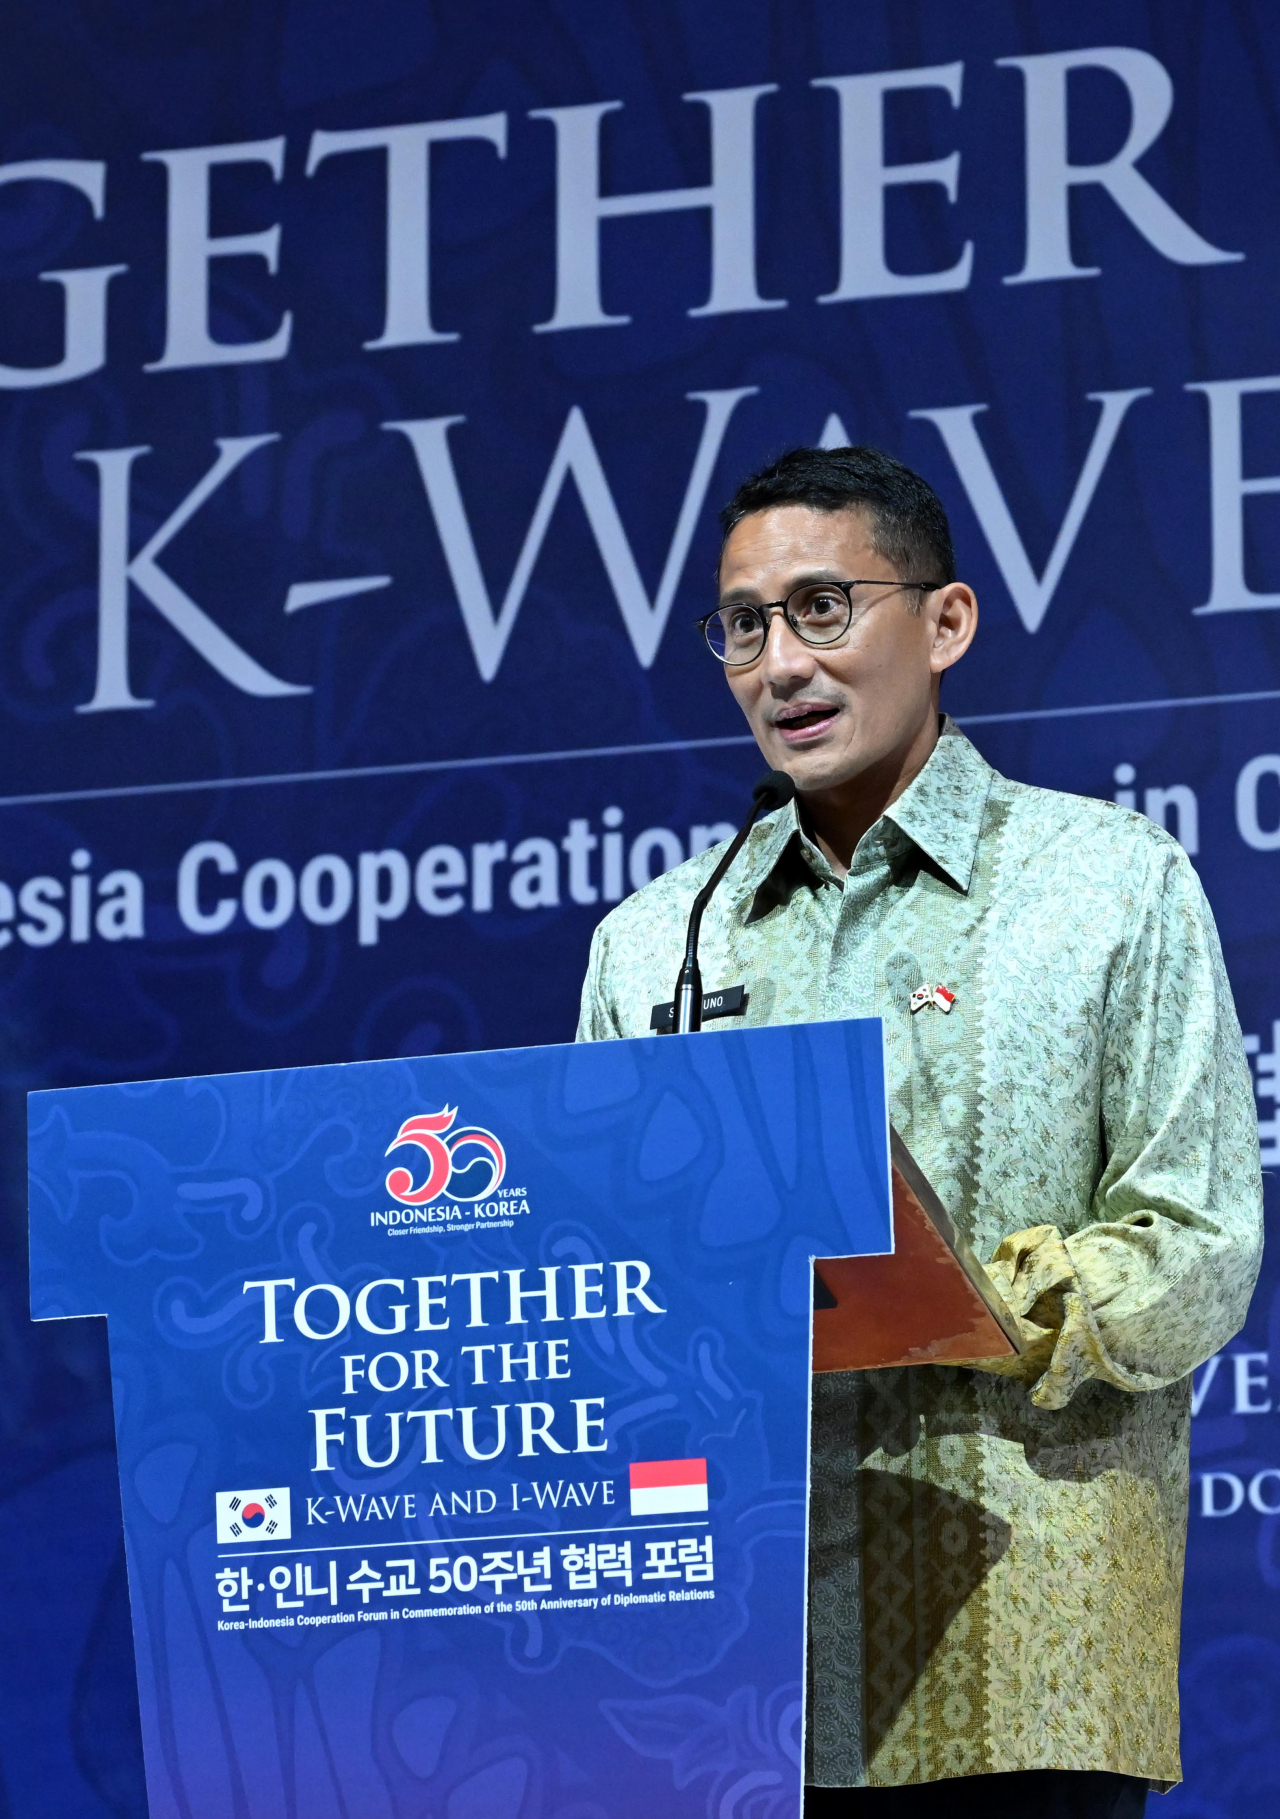 Indonesia's Minister of Tourism and Creative Economy Sandiaga Uno gives a keynote speech during the 